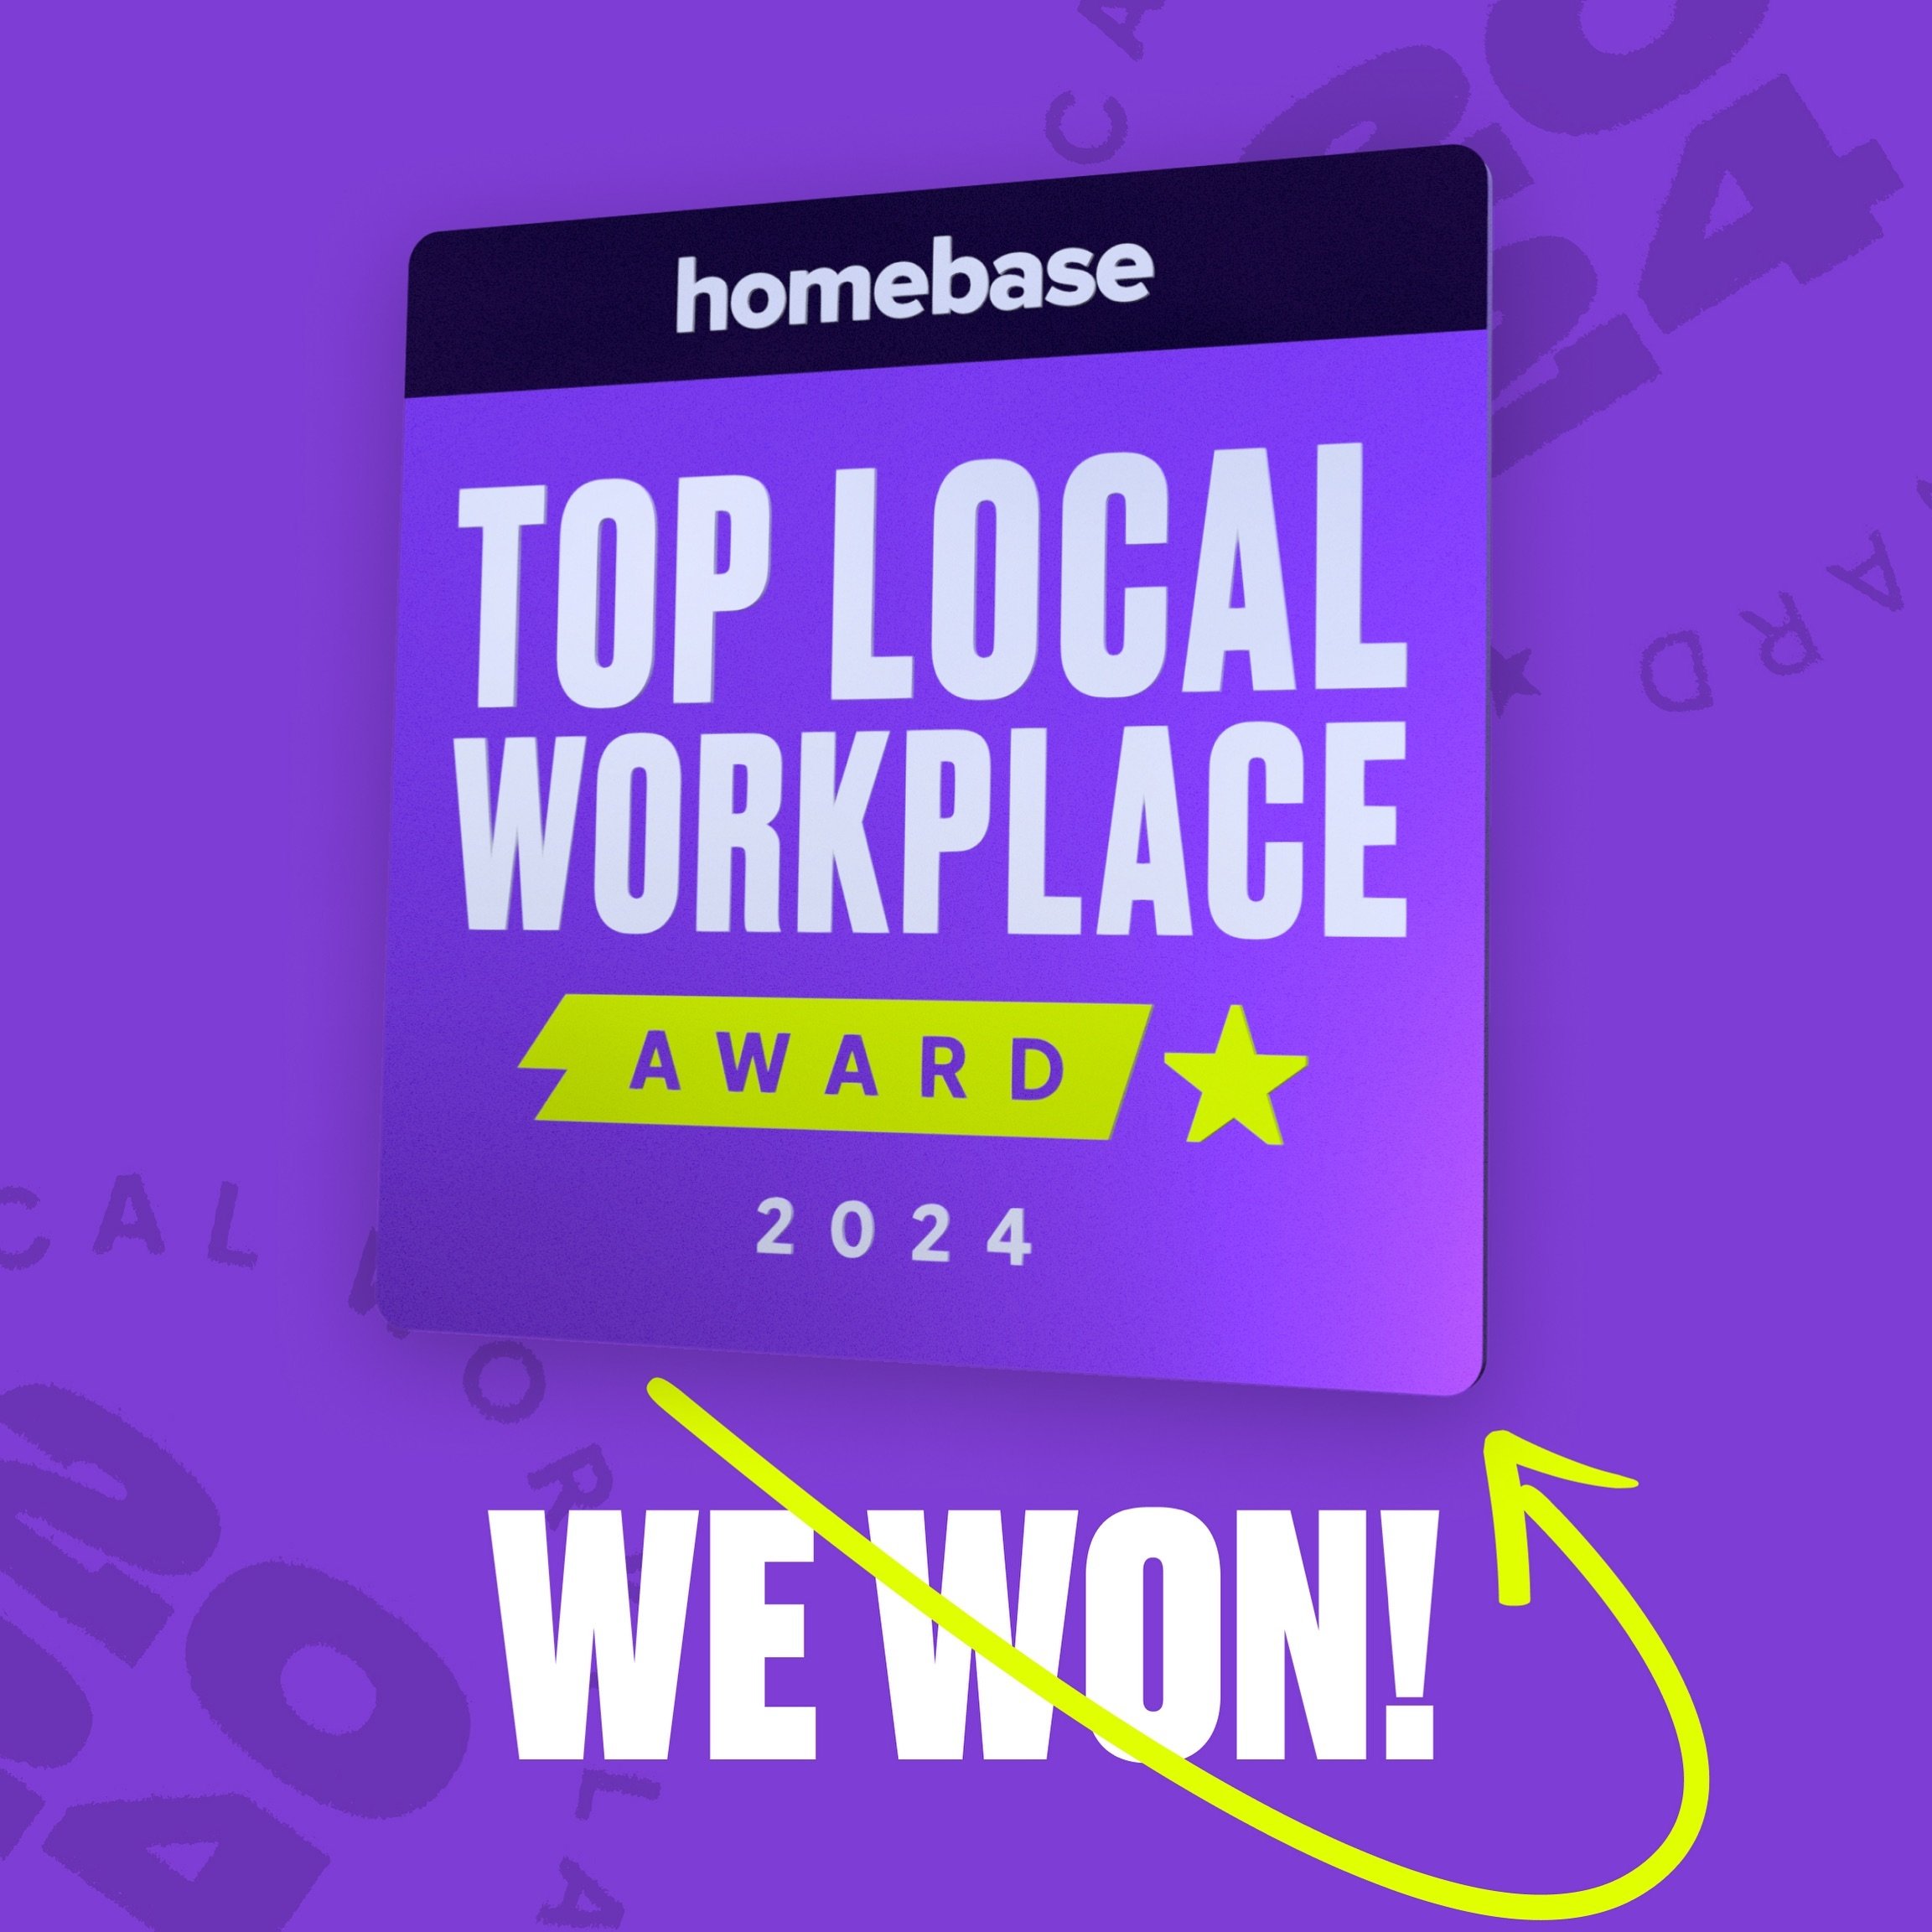 We are so excited to share that we were selected as a 2024 Top Local Workplace by @homebase 🤩🐶 if you&rsquo;d like to join our rockstar team of dog lovers, click the link in our bio to apply! 

#dogdaycare #dogboarding #doggiedaycare #toplocalworkp